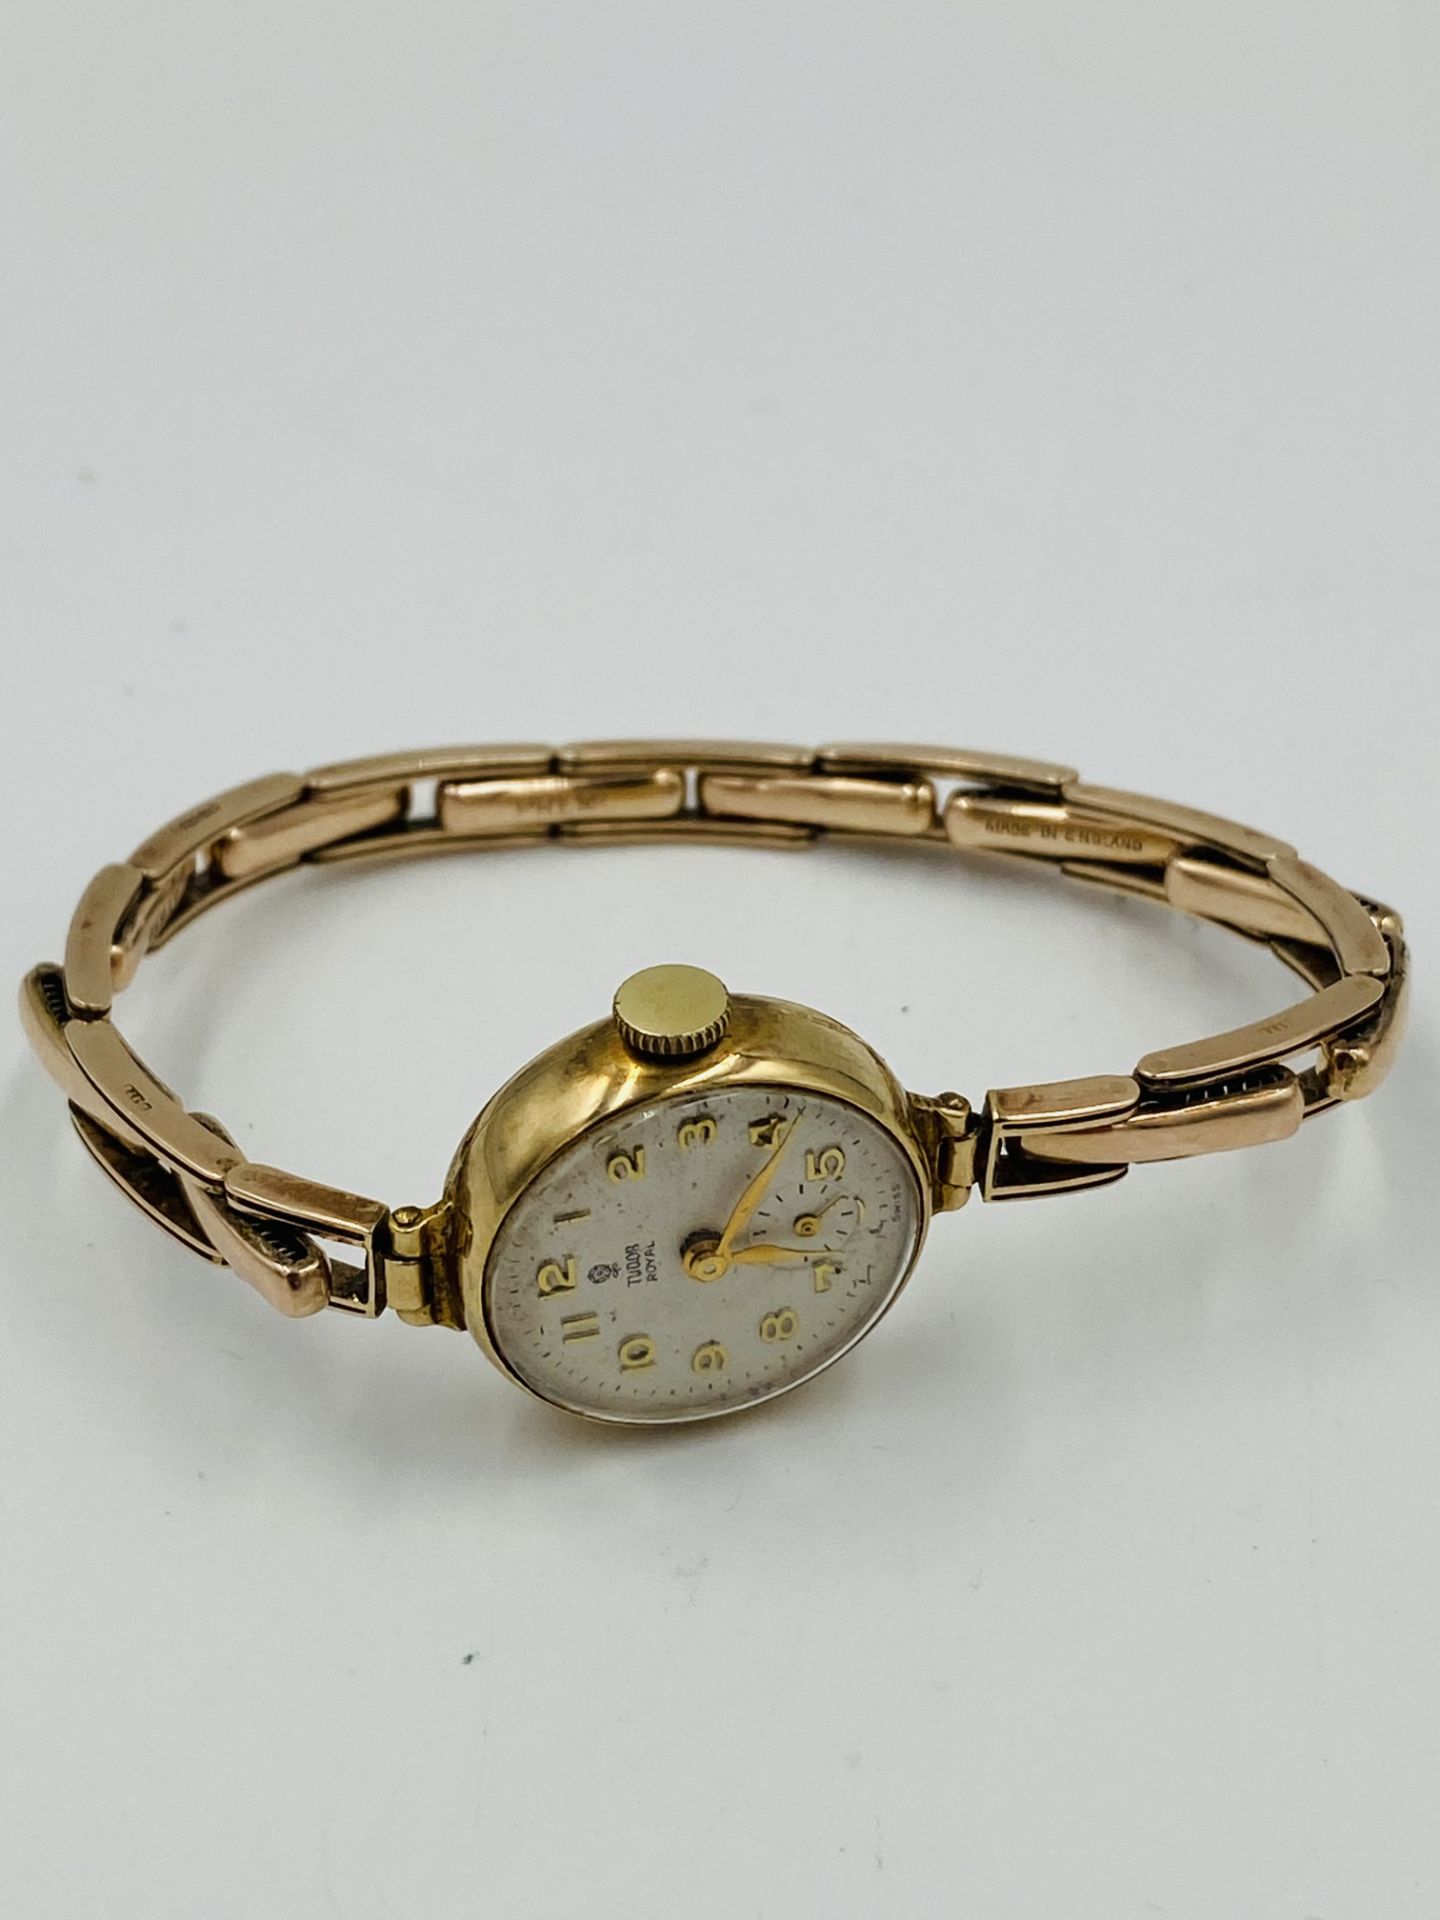 Tudor Royal ladies wrist watch in yellow metal case, on 9ct gold strap - Image 2 of 4